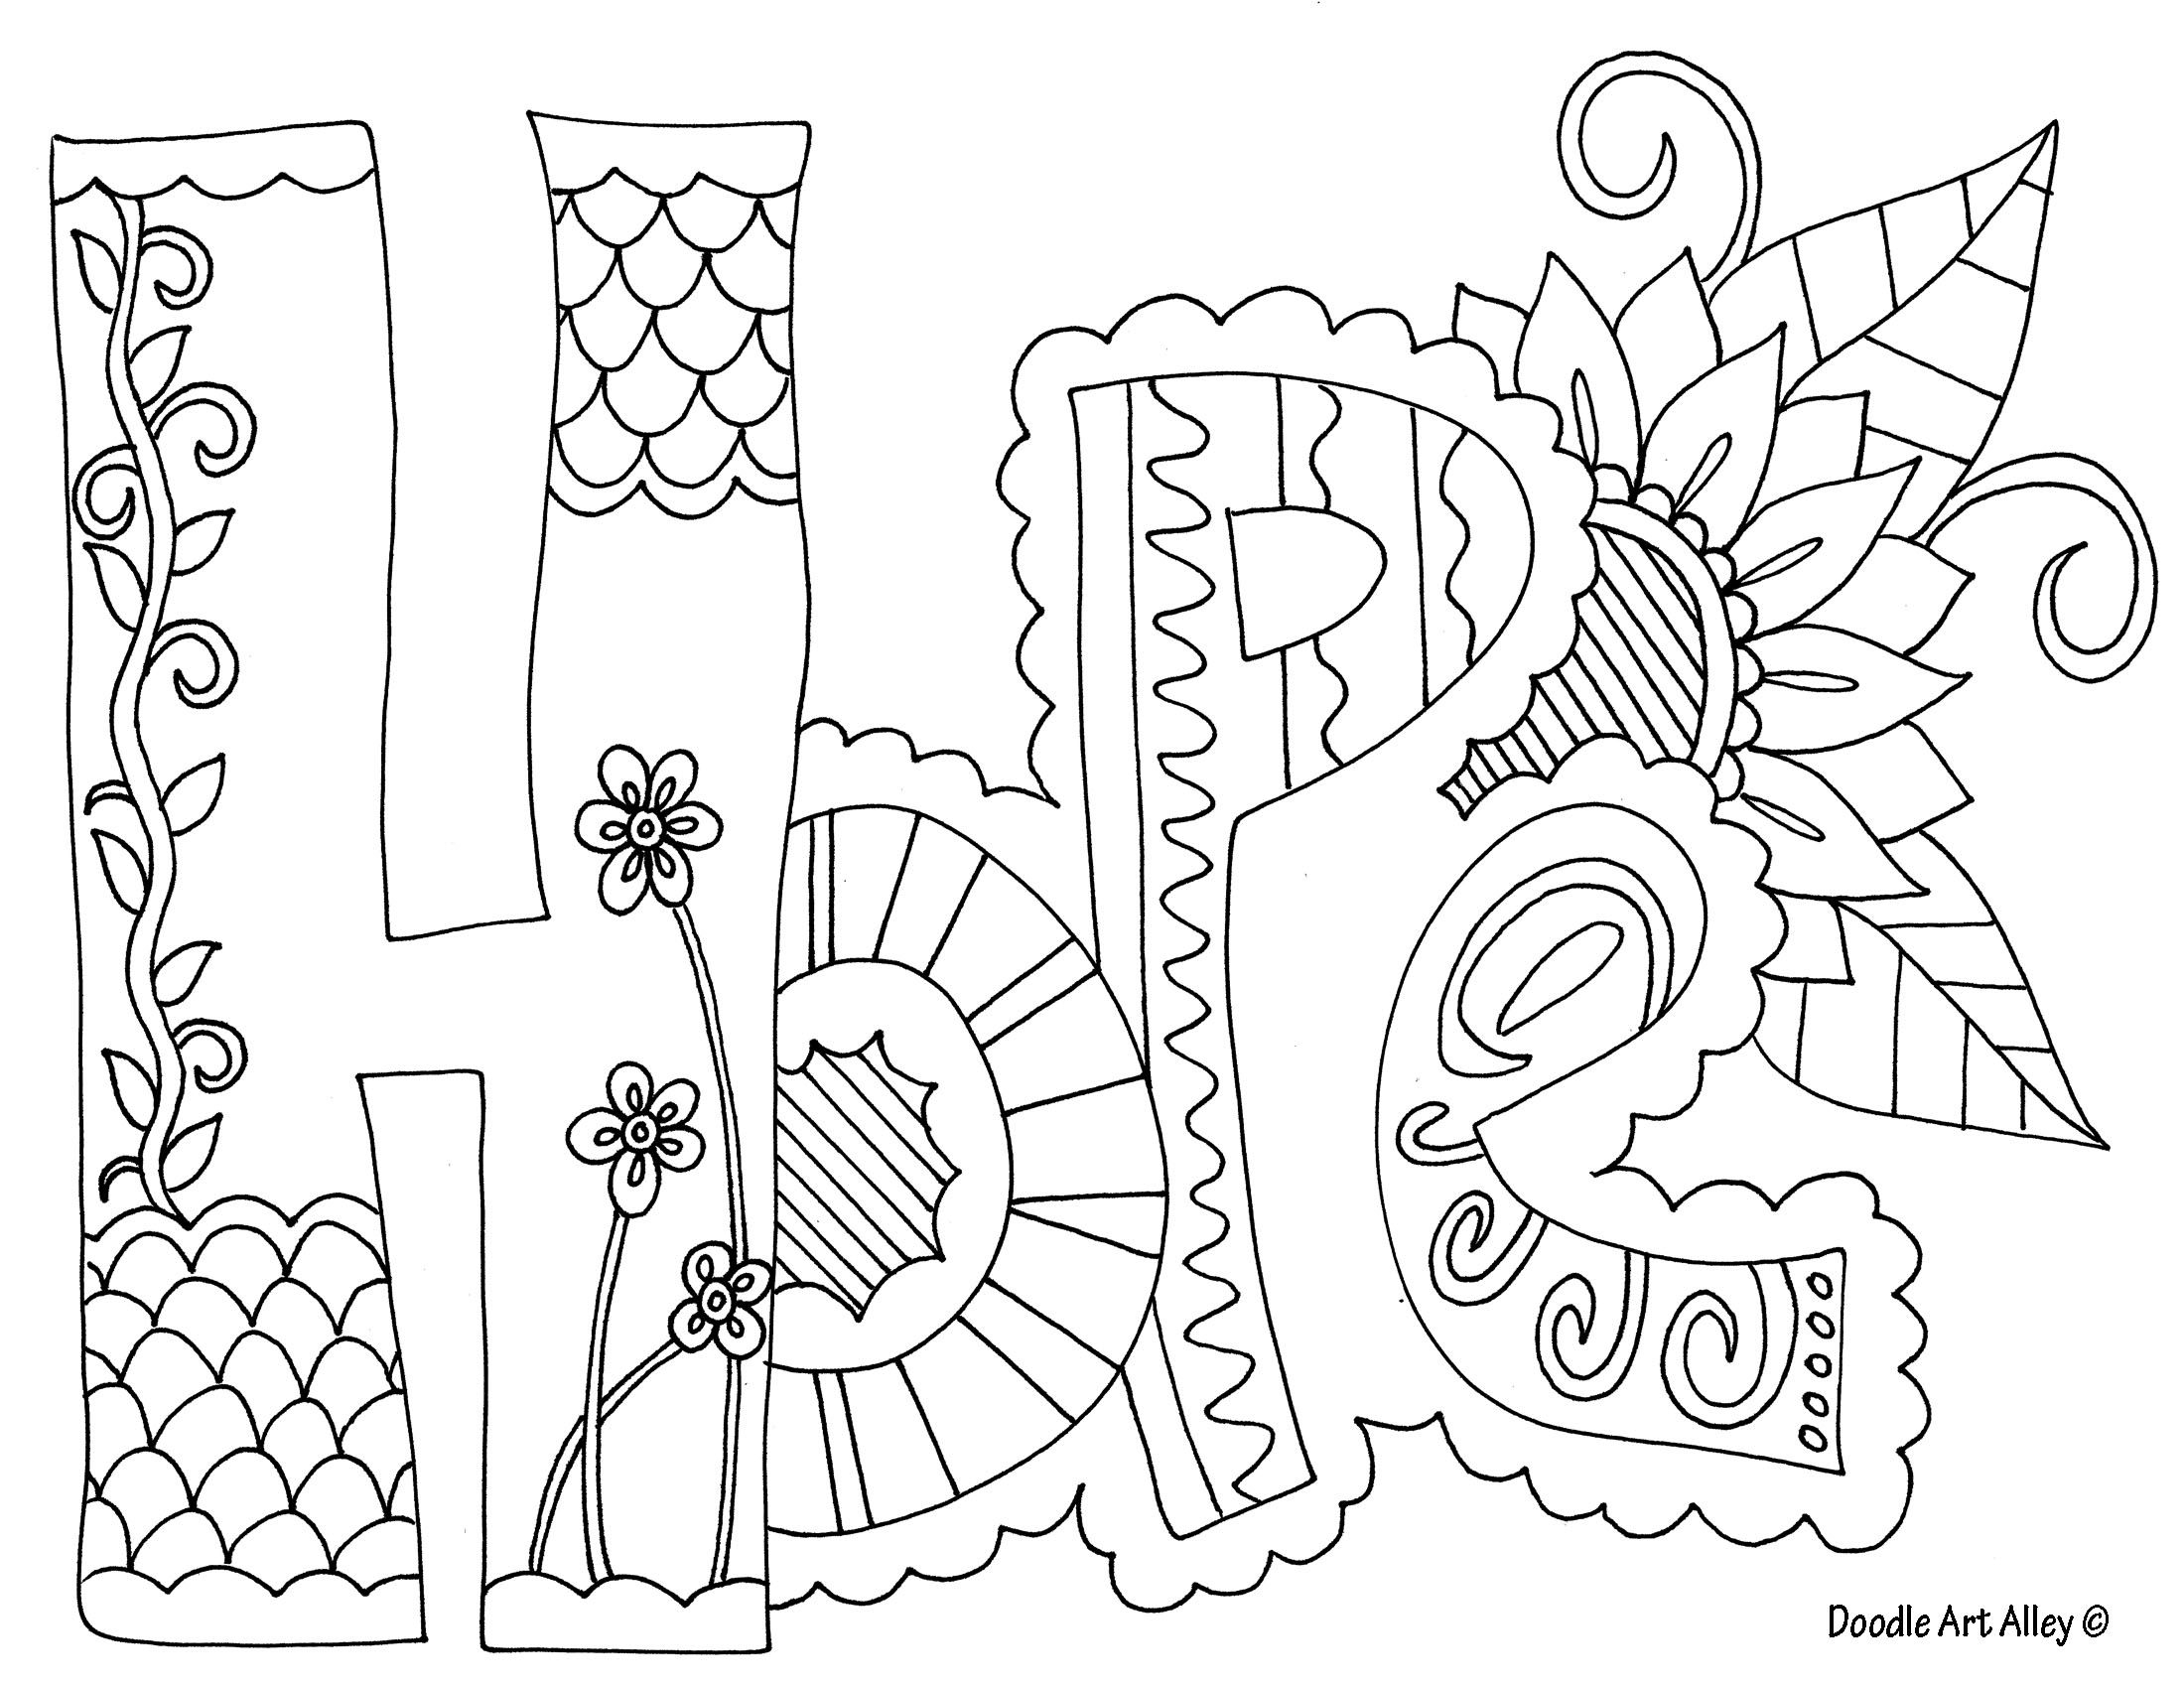 doodle-alley-coloring-pages-at-getcolorings-free-printable-colorings-pages-to-print-and-color